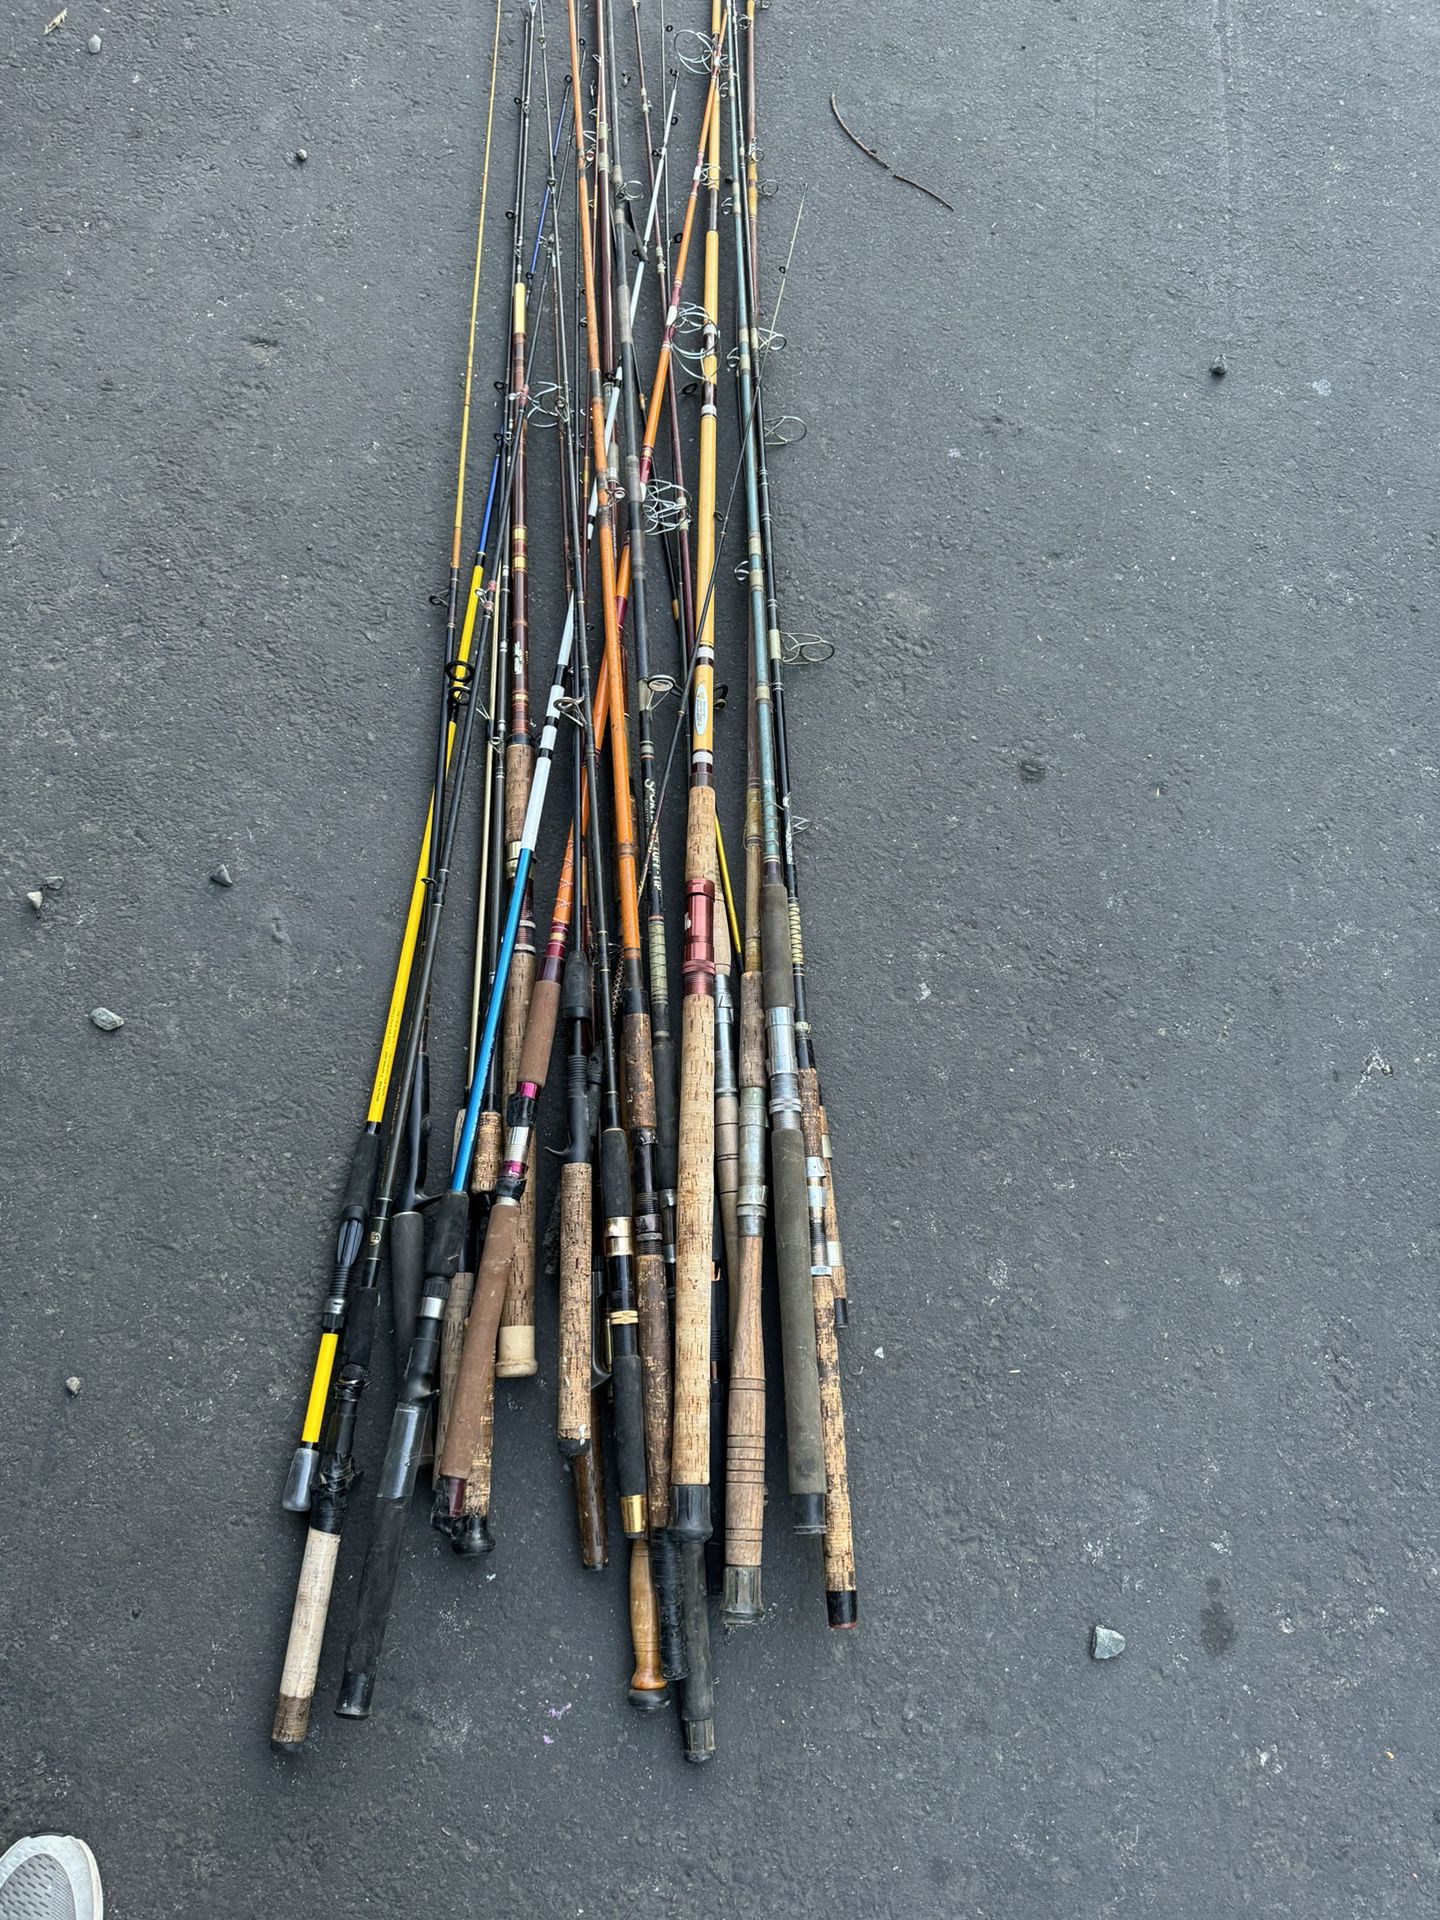 all the fishing rods with no wheels. 23 of them  an 6 fishing pole with reels 